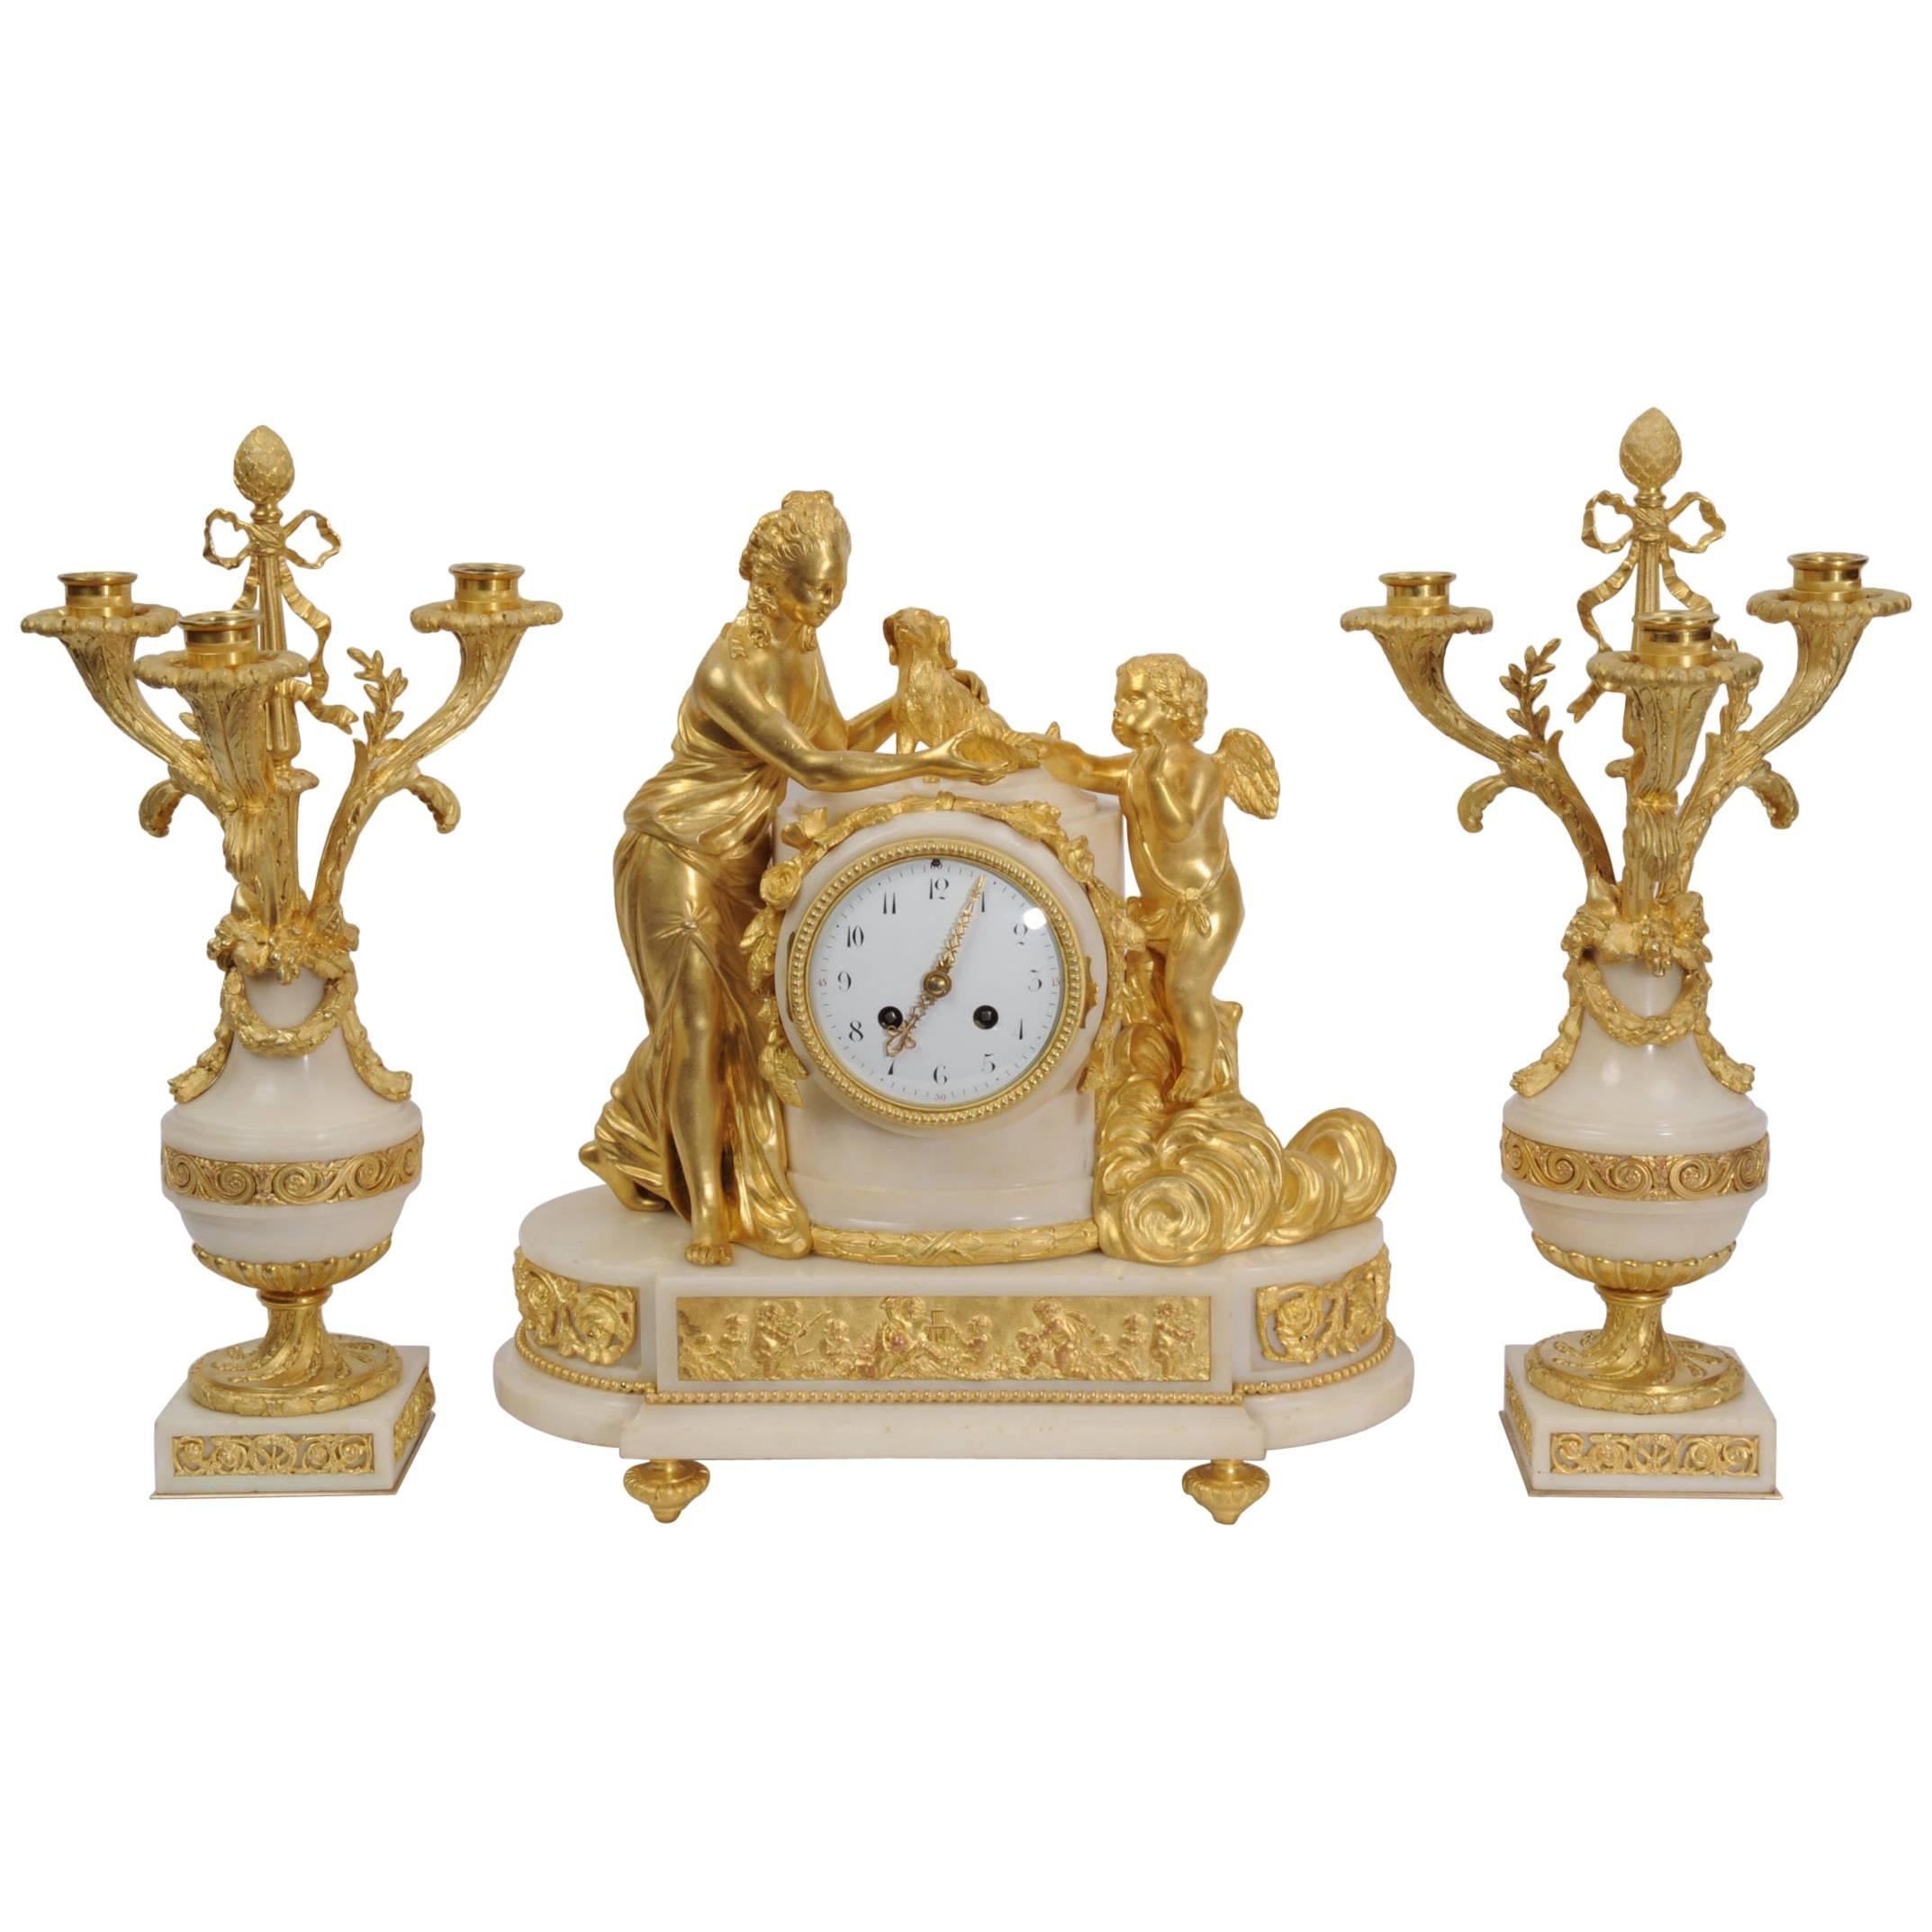 Venus with Amour and Dog, Superb Ormolu and White Mable Clock Set, circa 1900